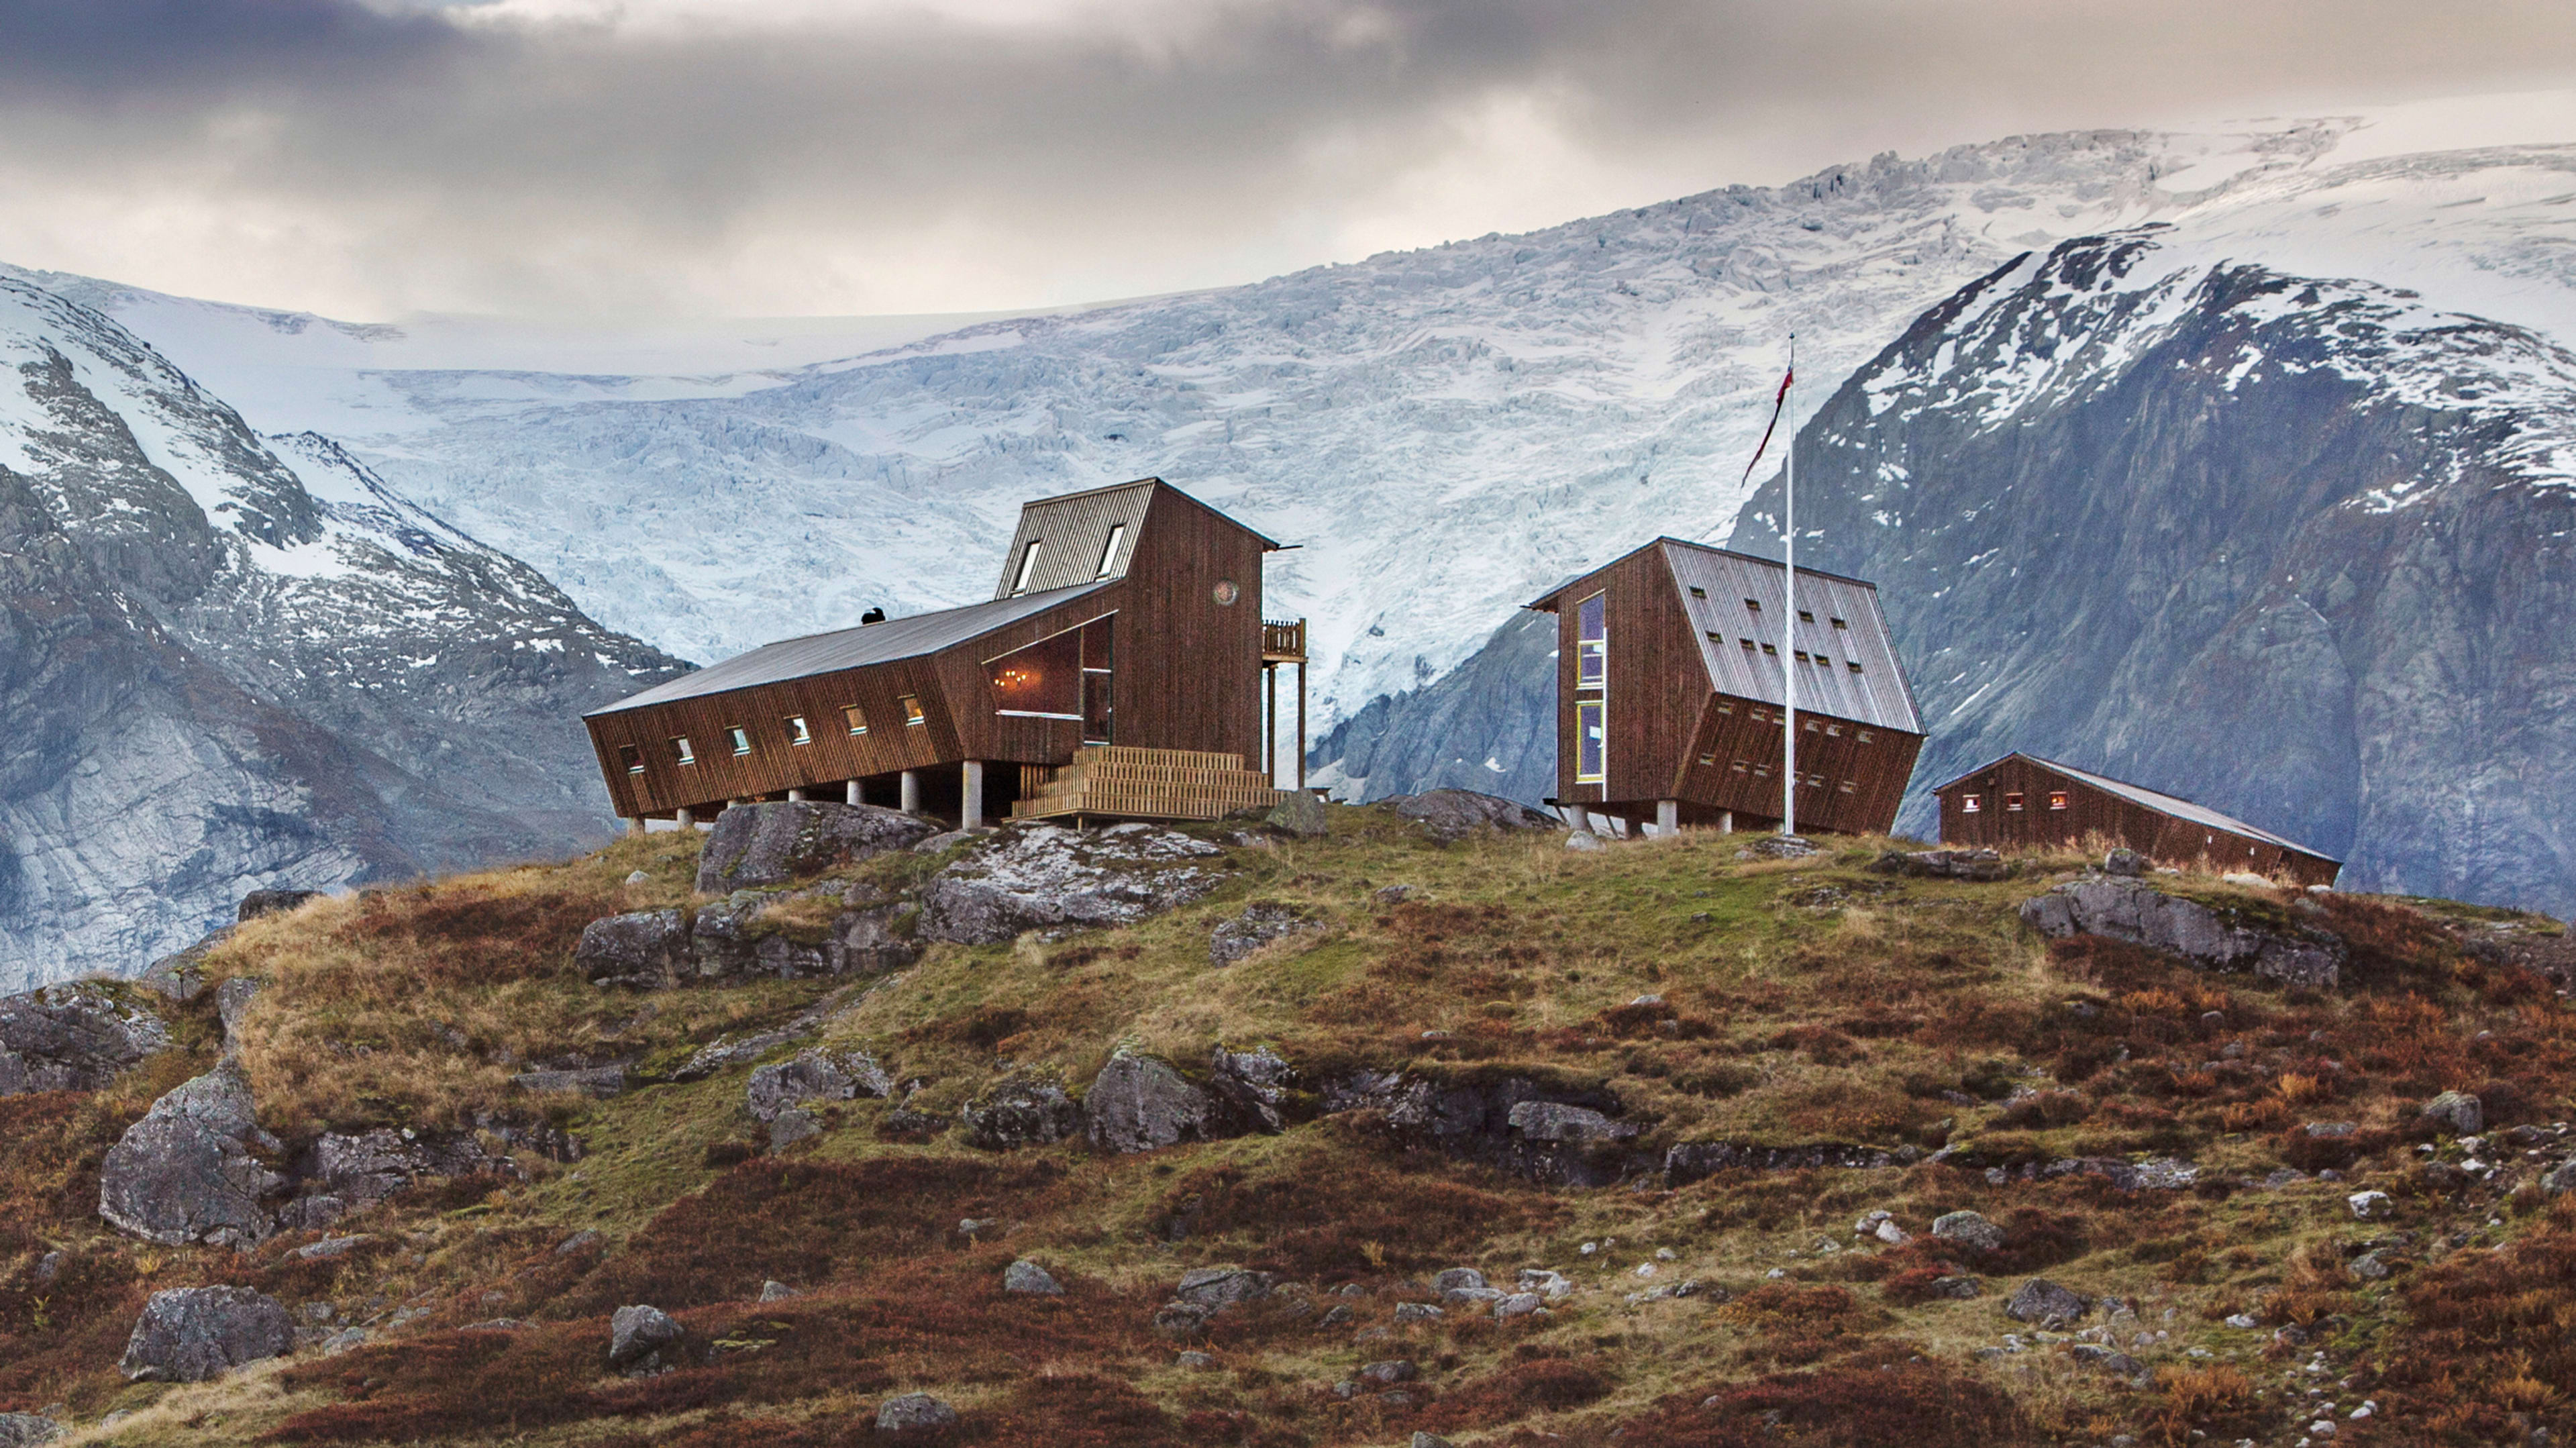 How the world’s most remote buildings can help us adapt to climate change